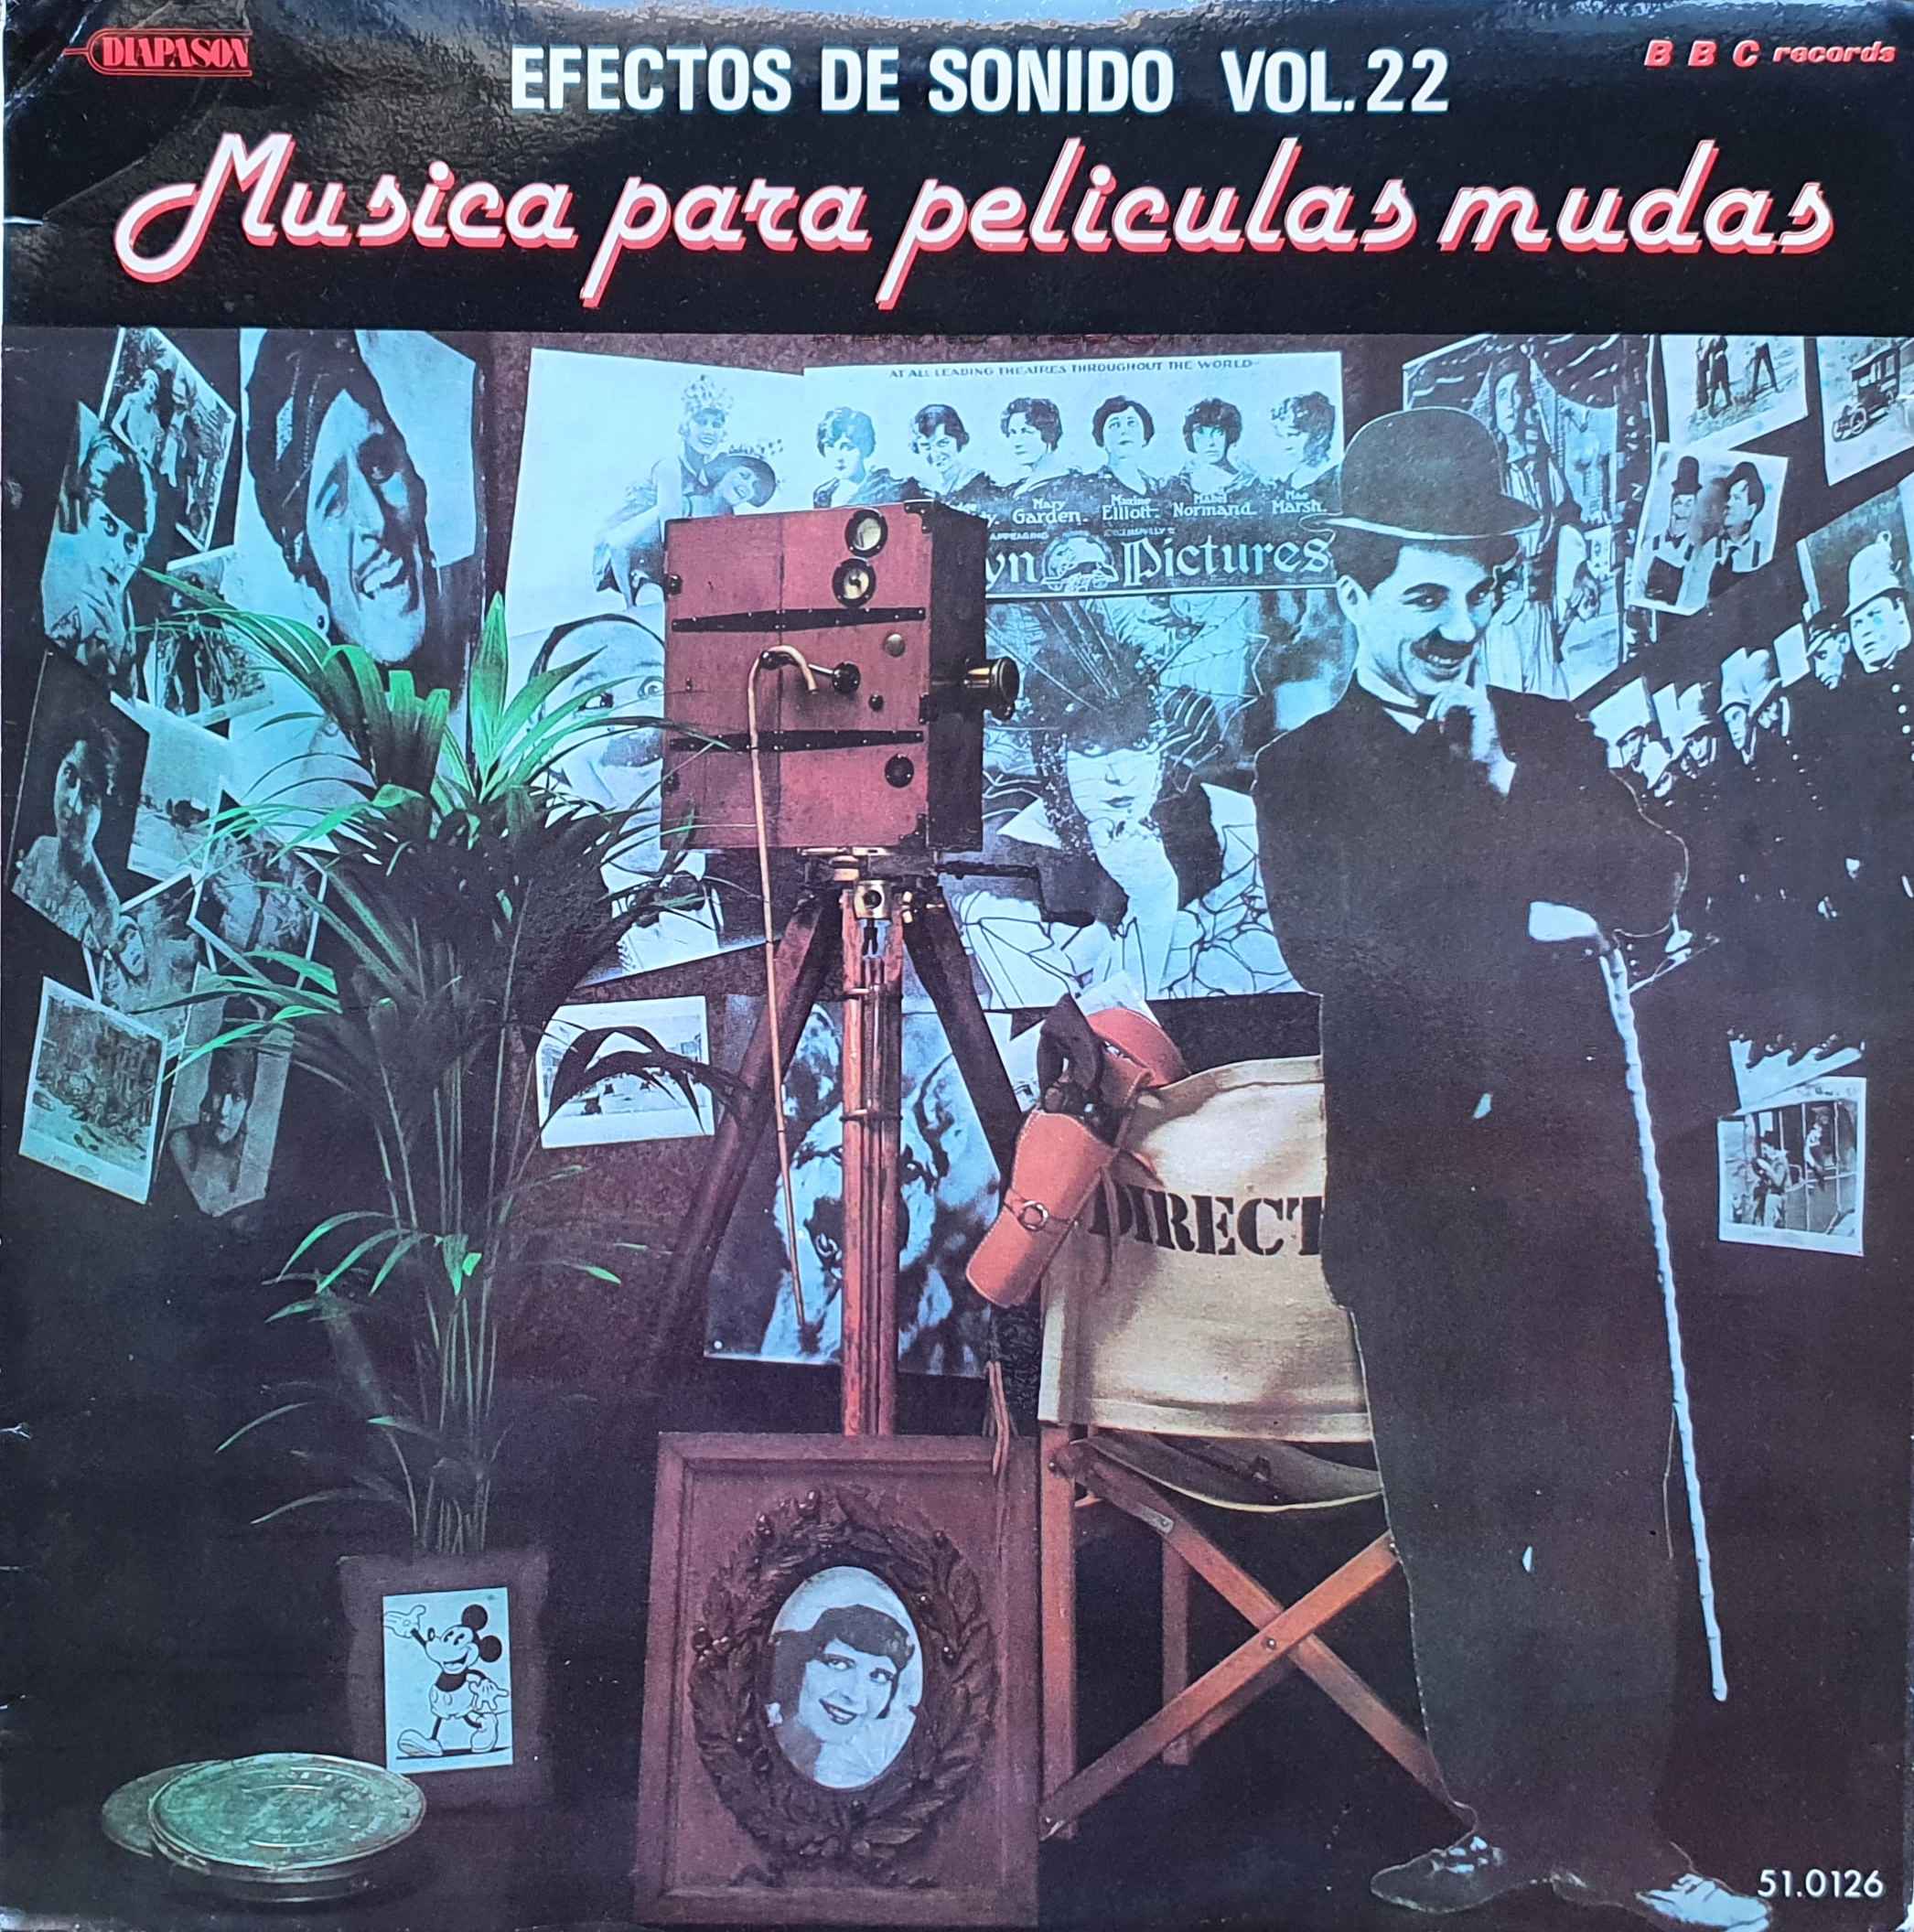 Picture of 51.0126 Efectos de sonido - Musica Para Peliculas Mudas (Spanish import) by artist Various from the BBC albums - Records and Tapes library